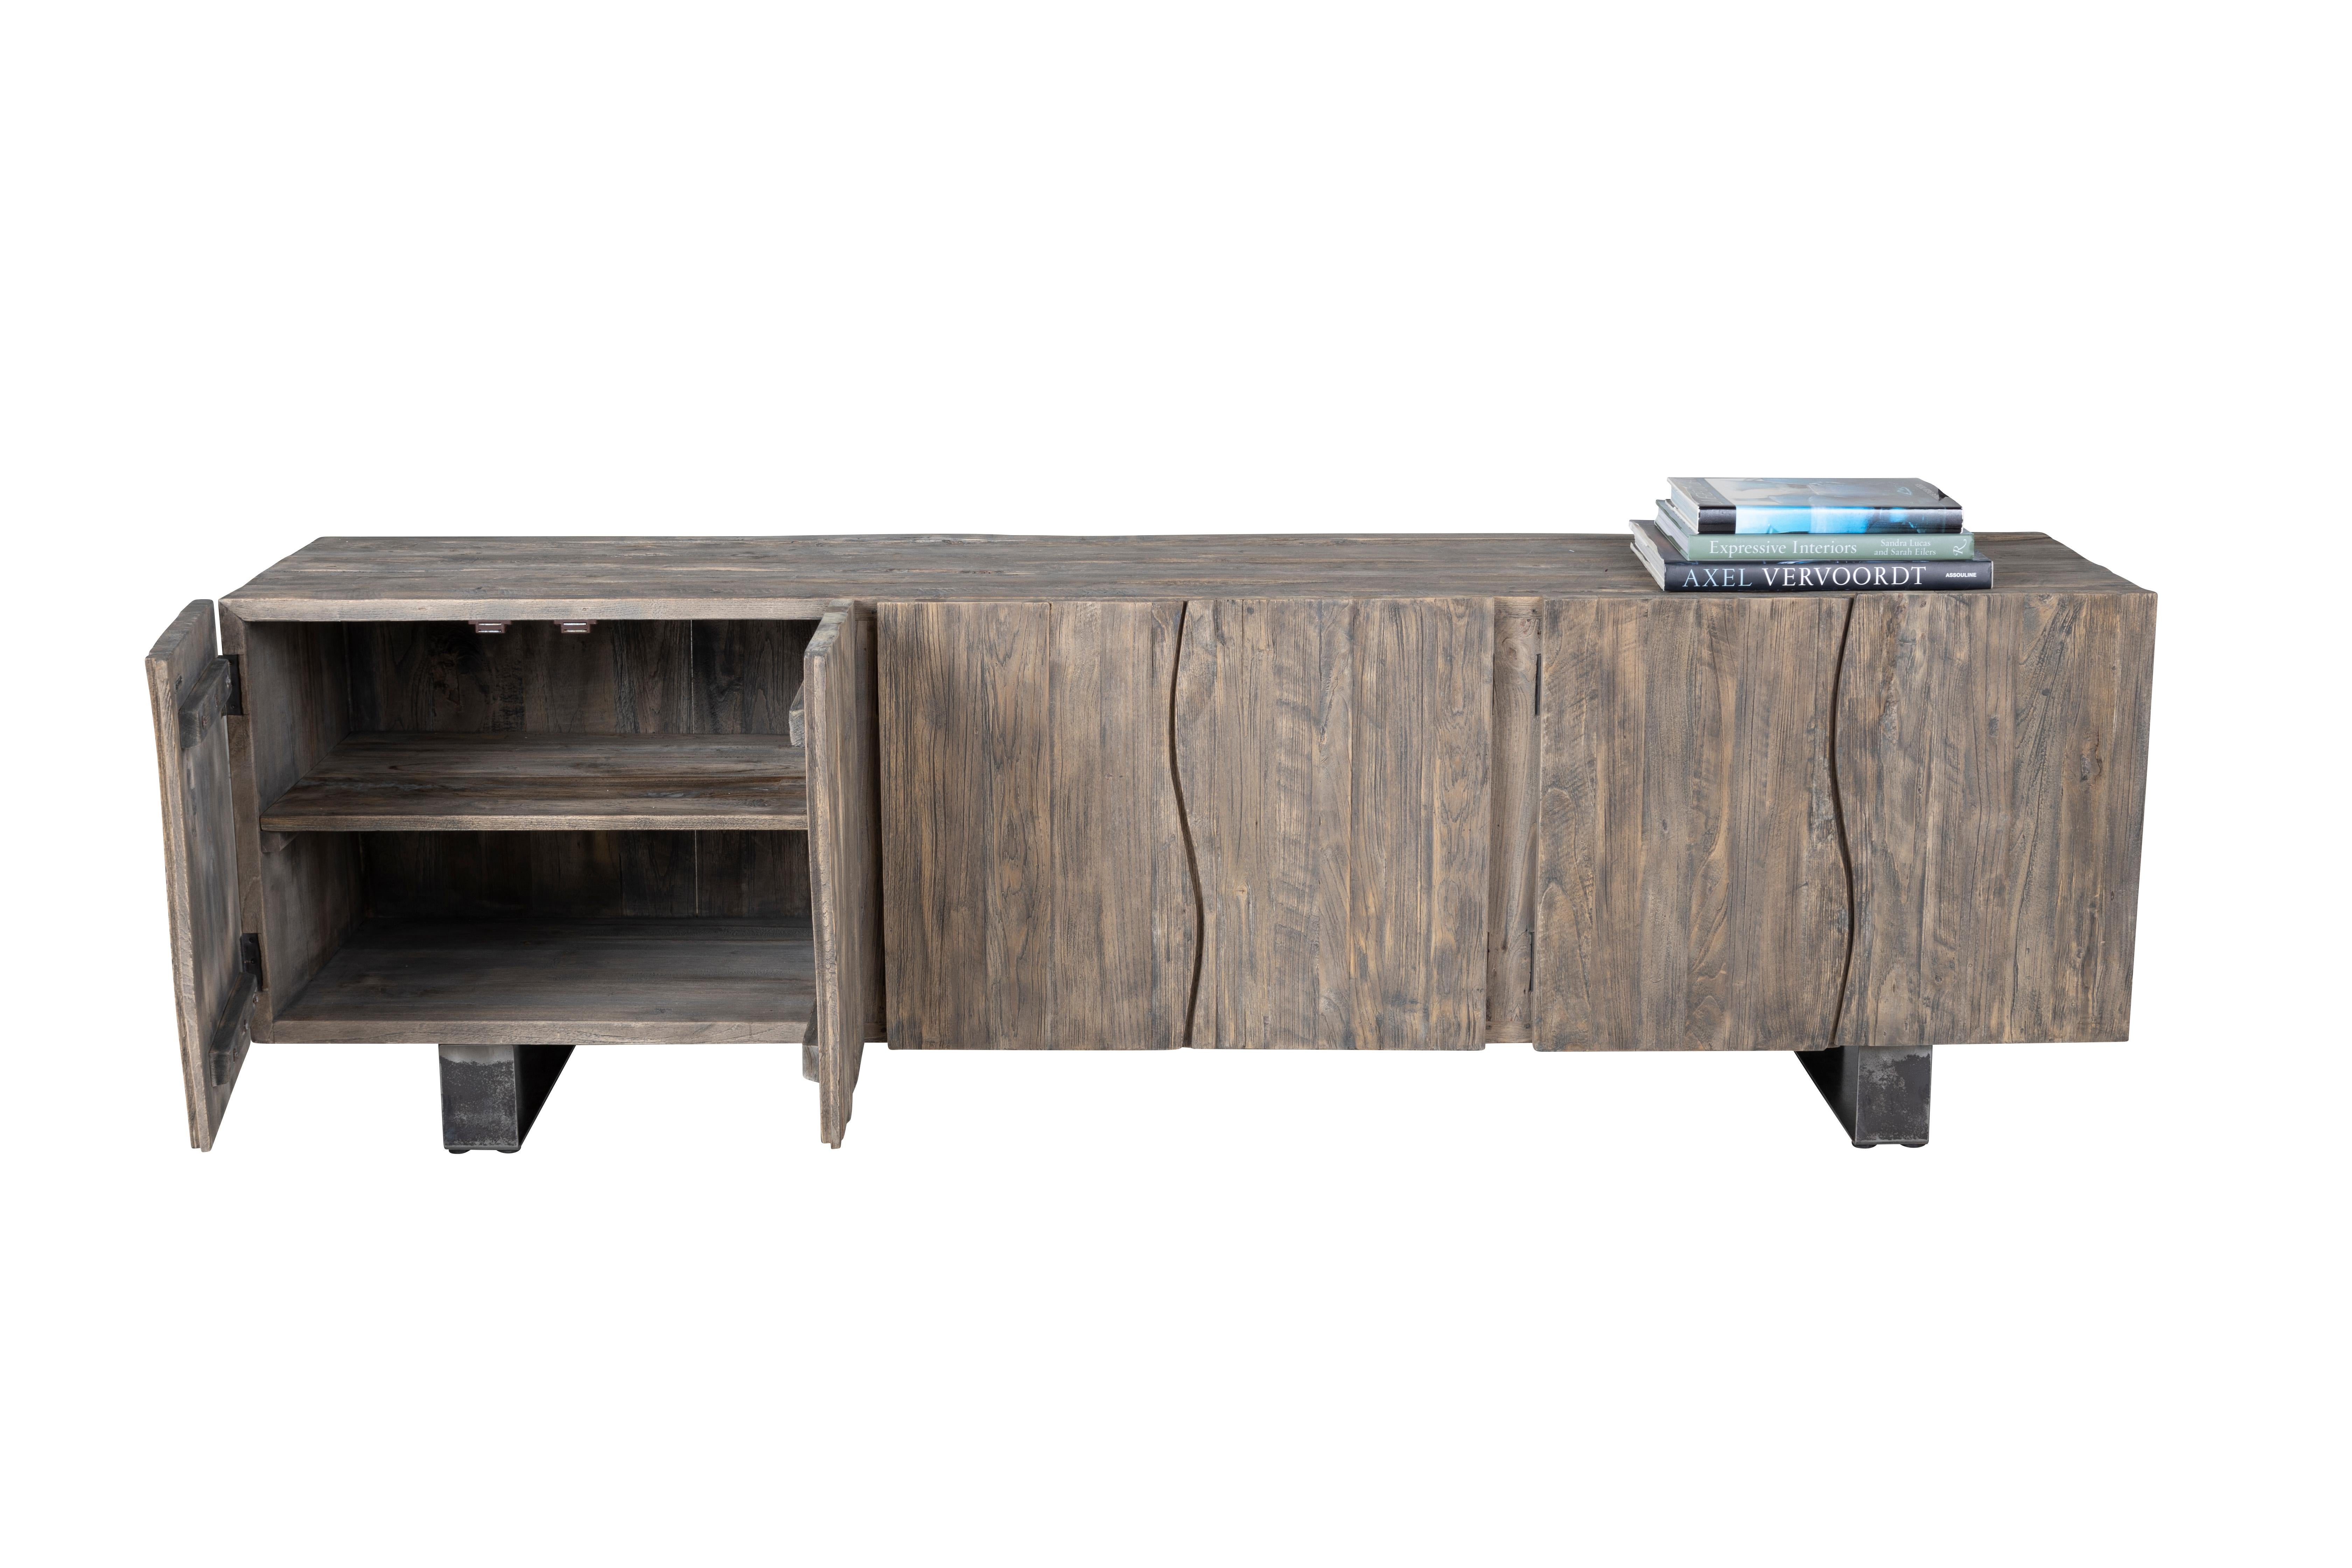 Made of solid wood this six-door server is a modern-day antique with an original grey tone patina—a sophisticated touch for your dining room. This server showcases six door compartments in a minimalist fashion. The sleek simple front creates